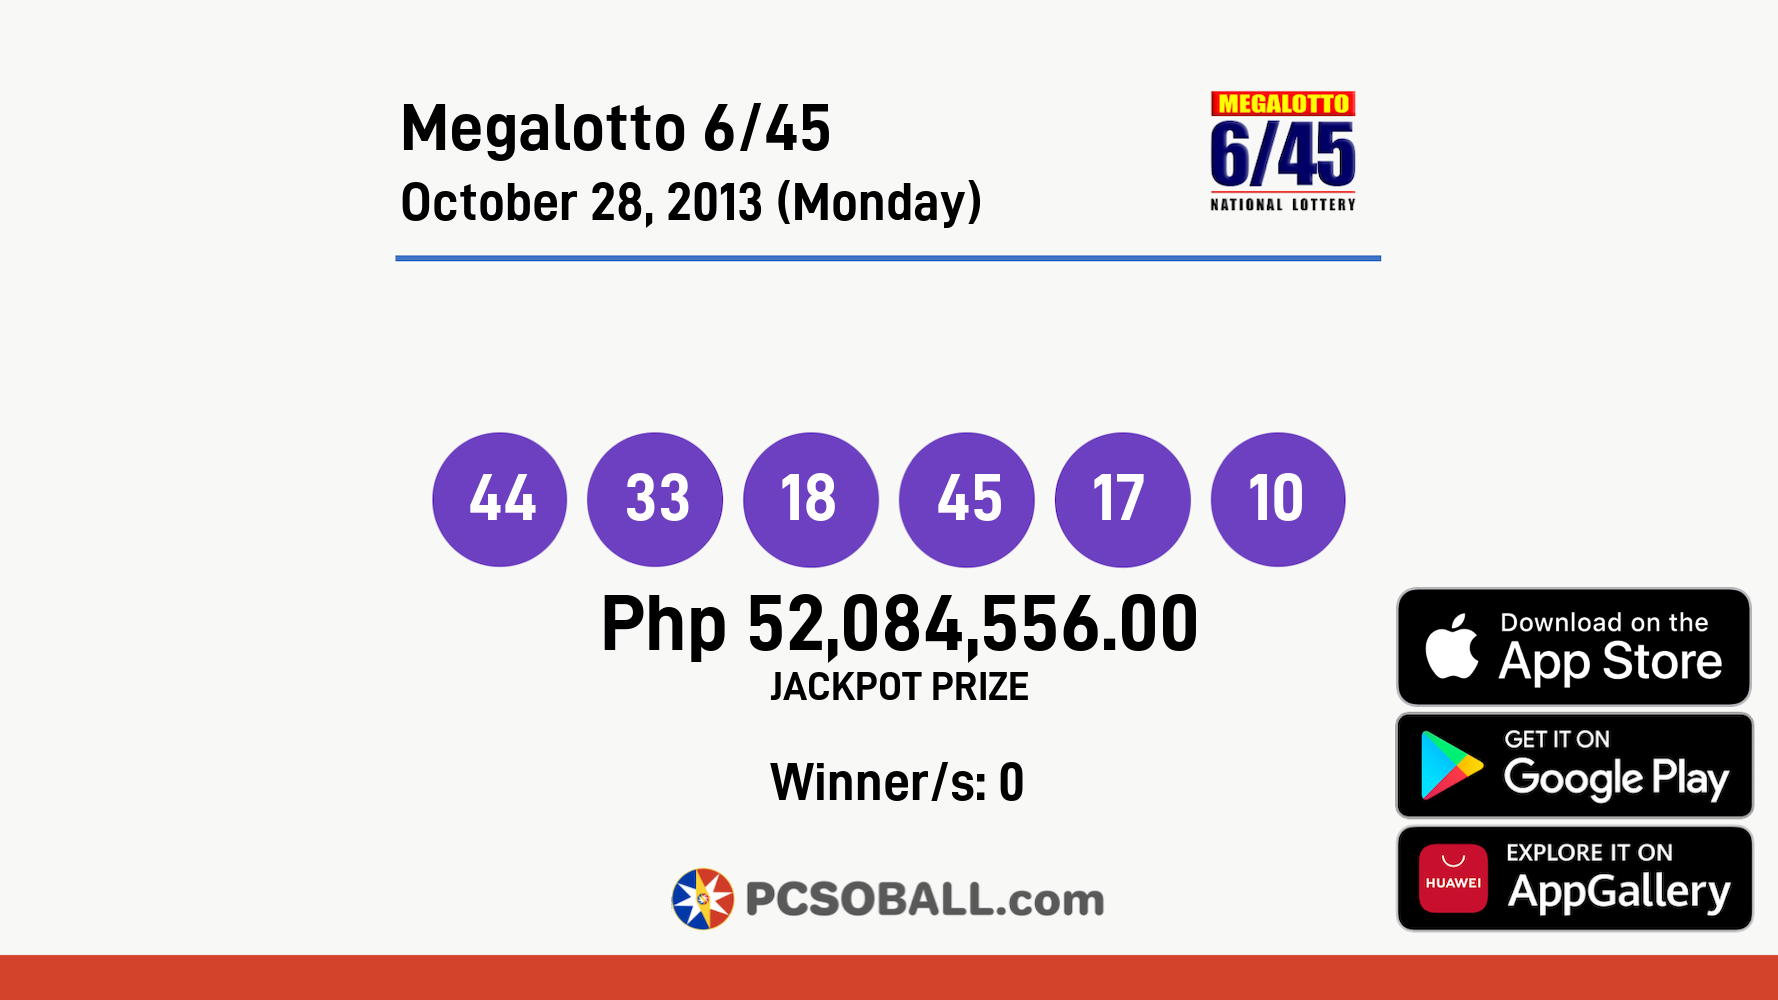 Megalotto 6/45 October 28, 2013 (Monday) Result